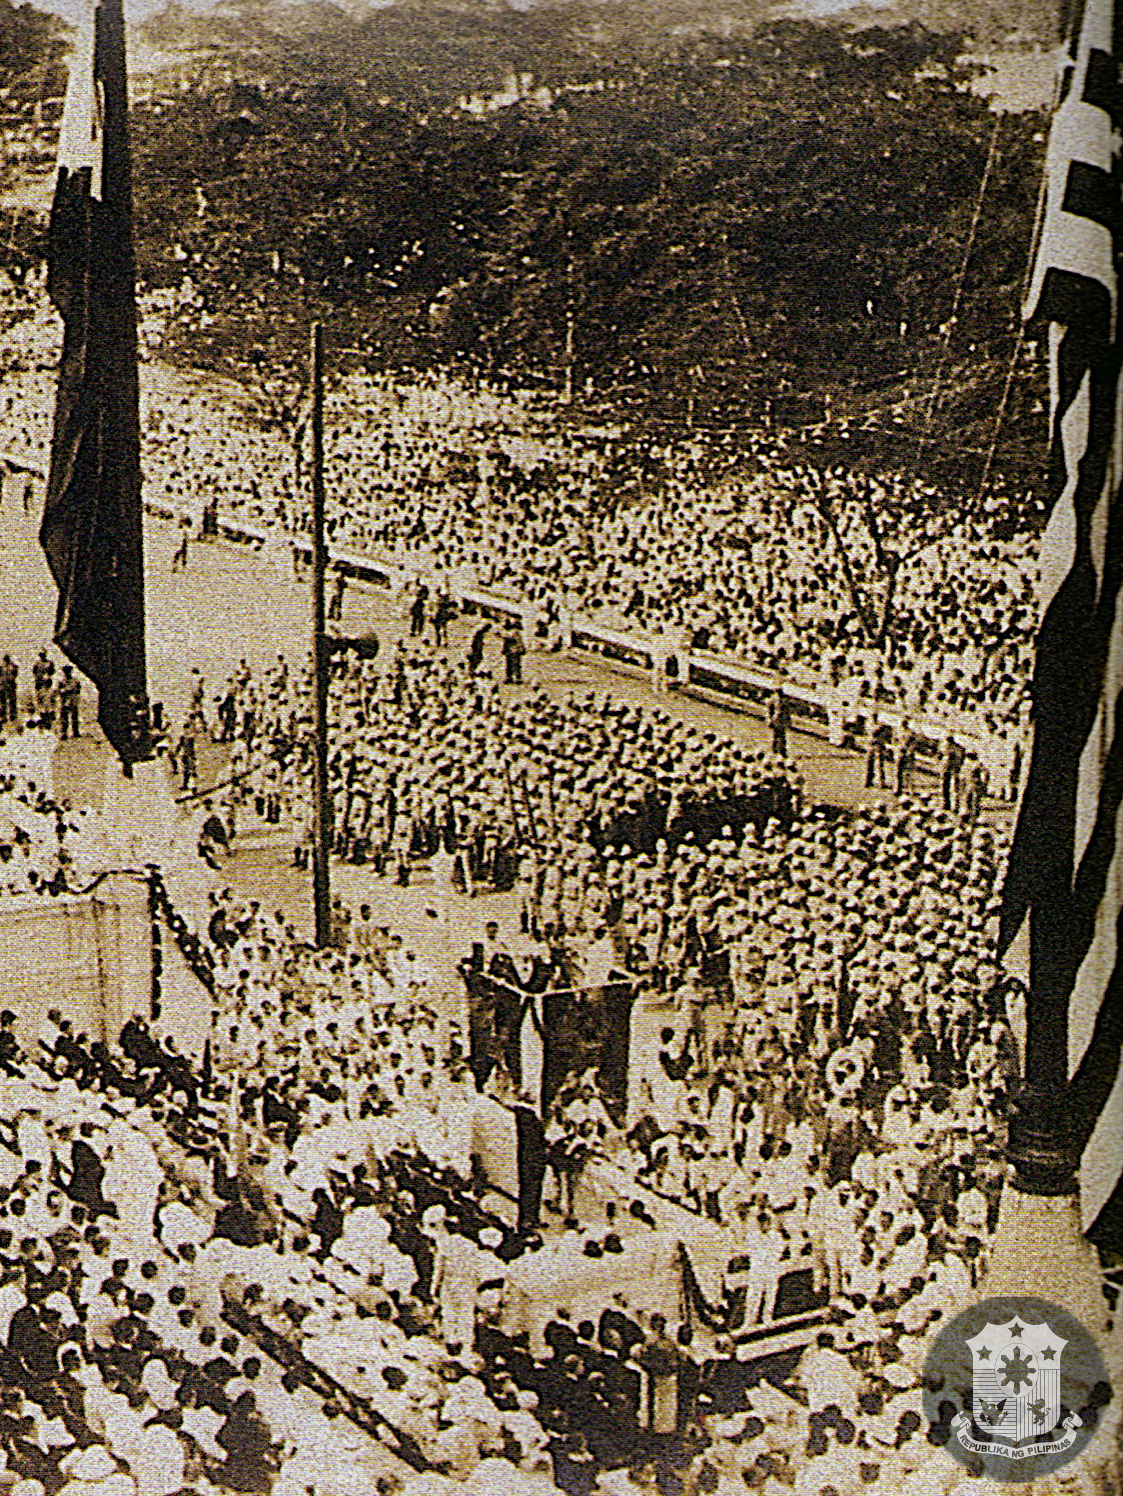 Inauguration of the Commonwealth LIBERTY